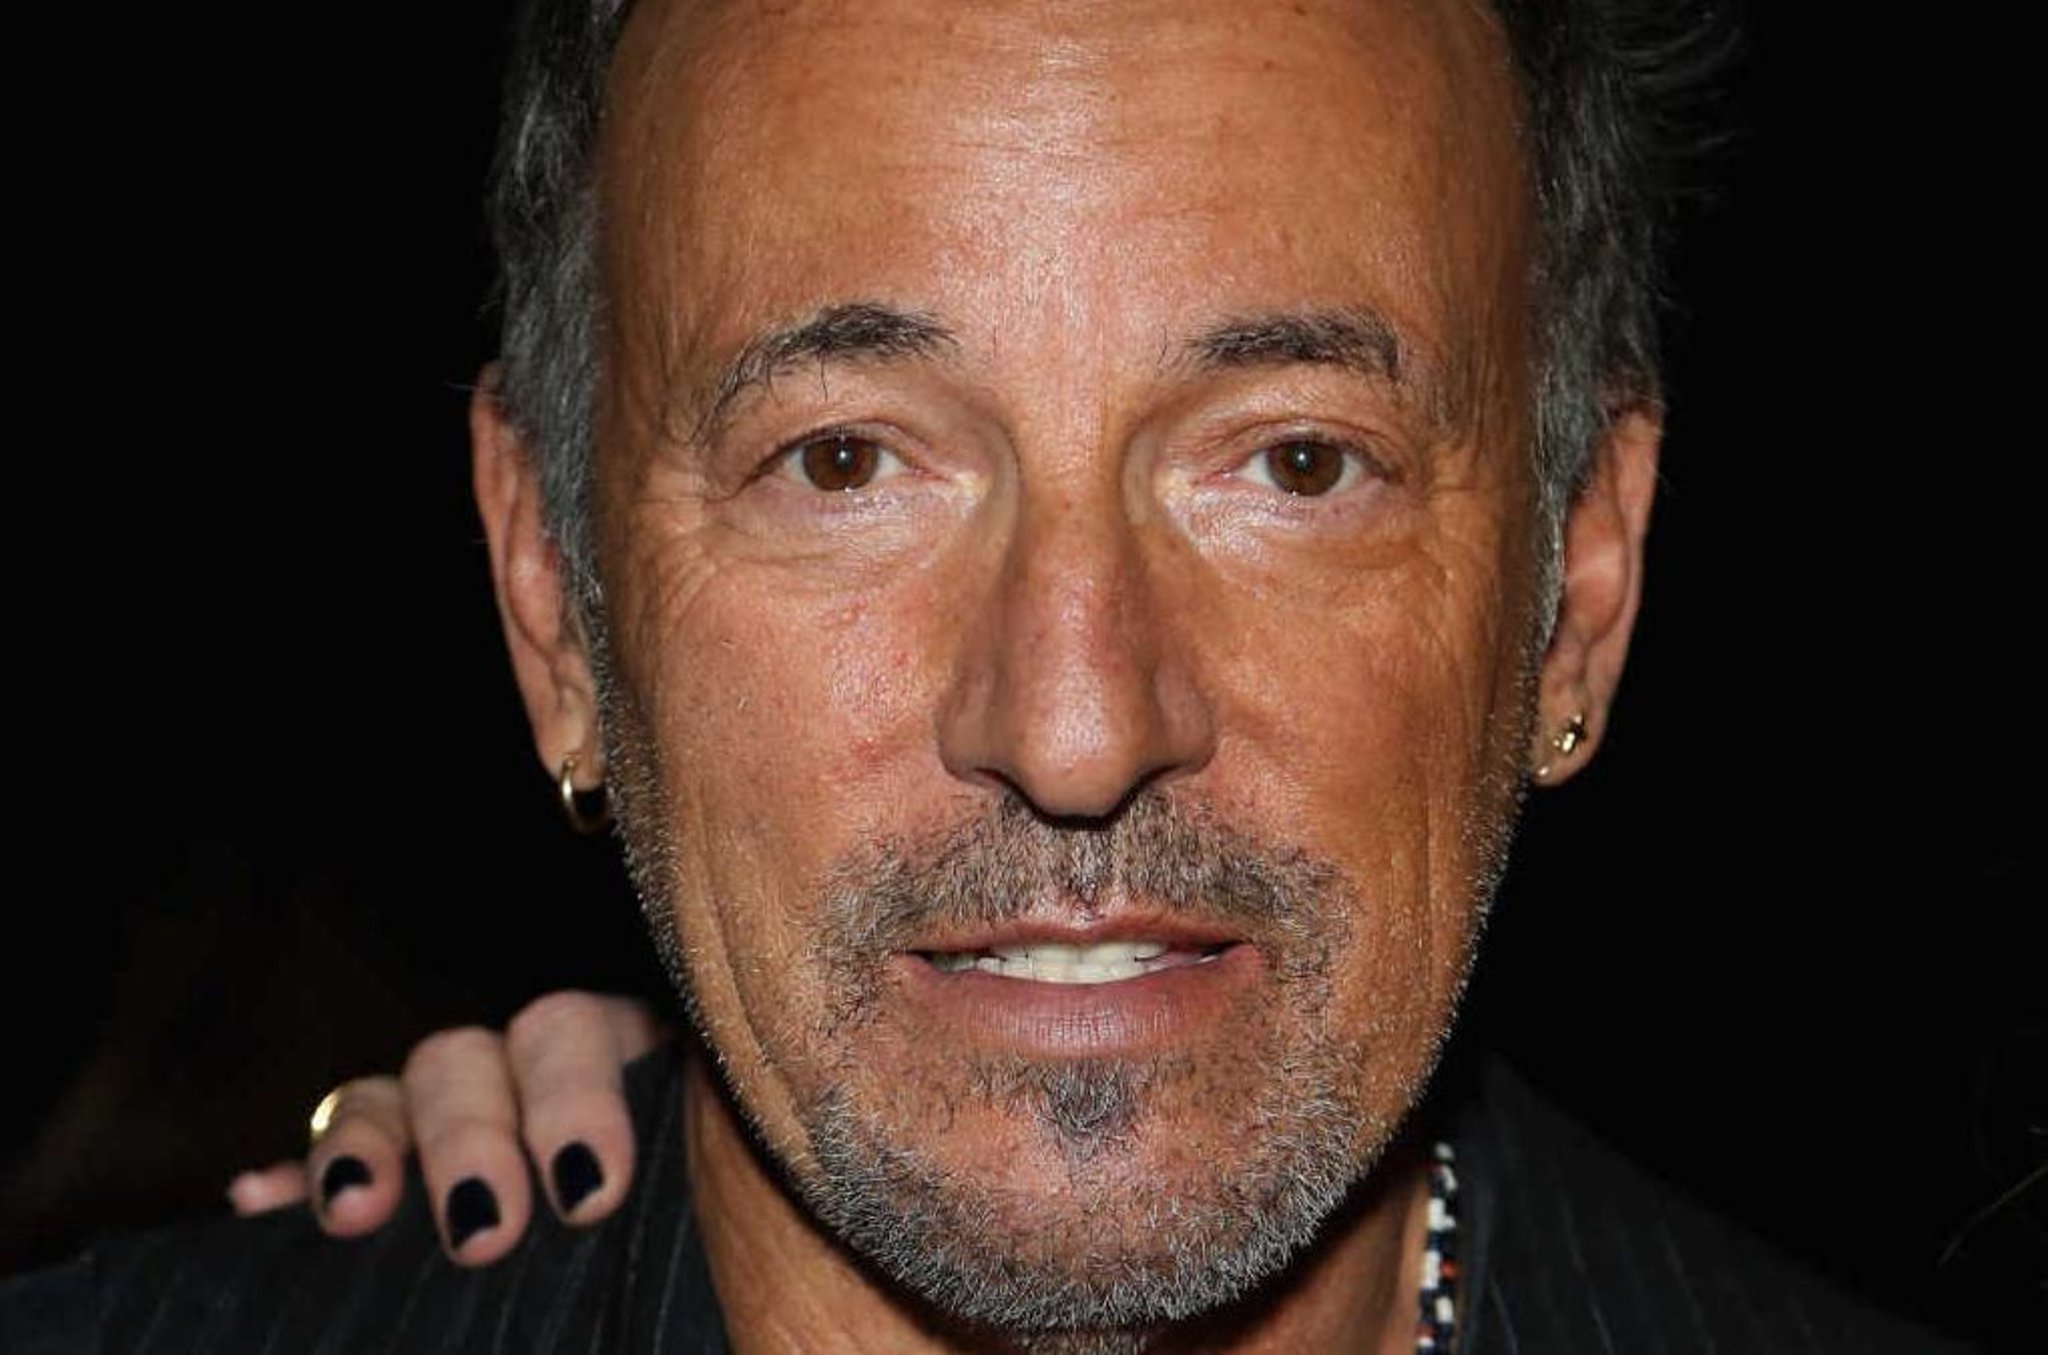 Bruce Springsteen: Dates announced for Dublin shows 2023 - tickets go on sale May 27